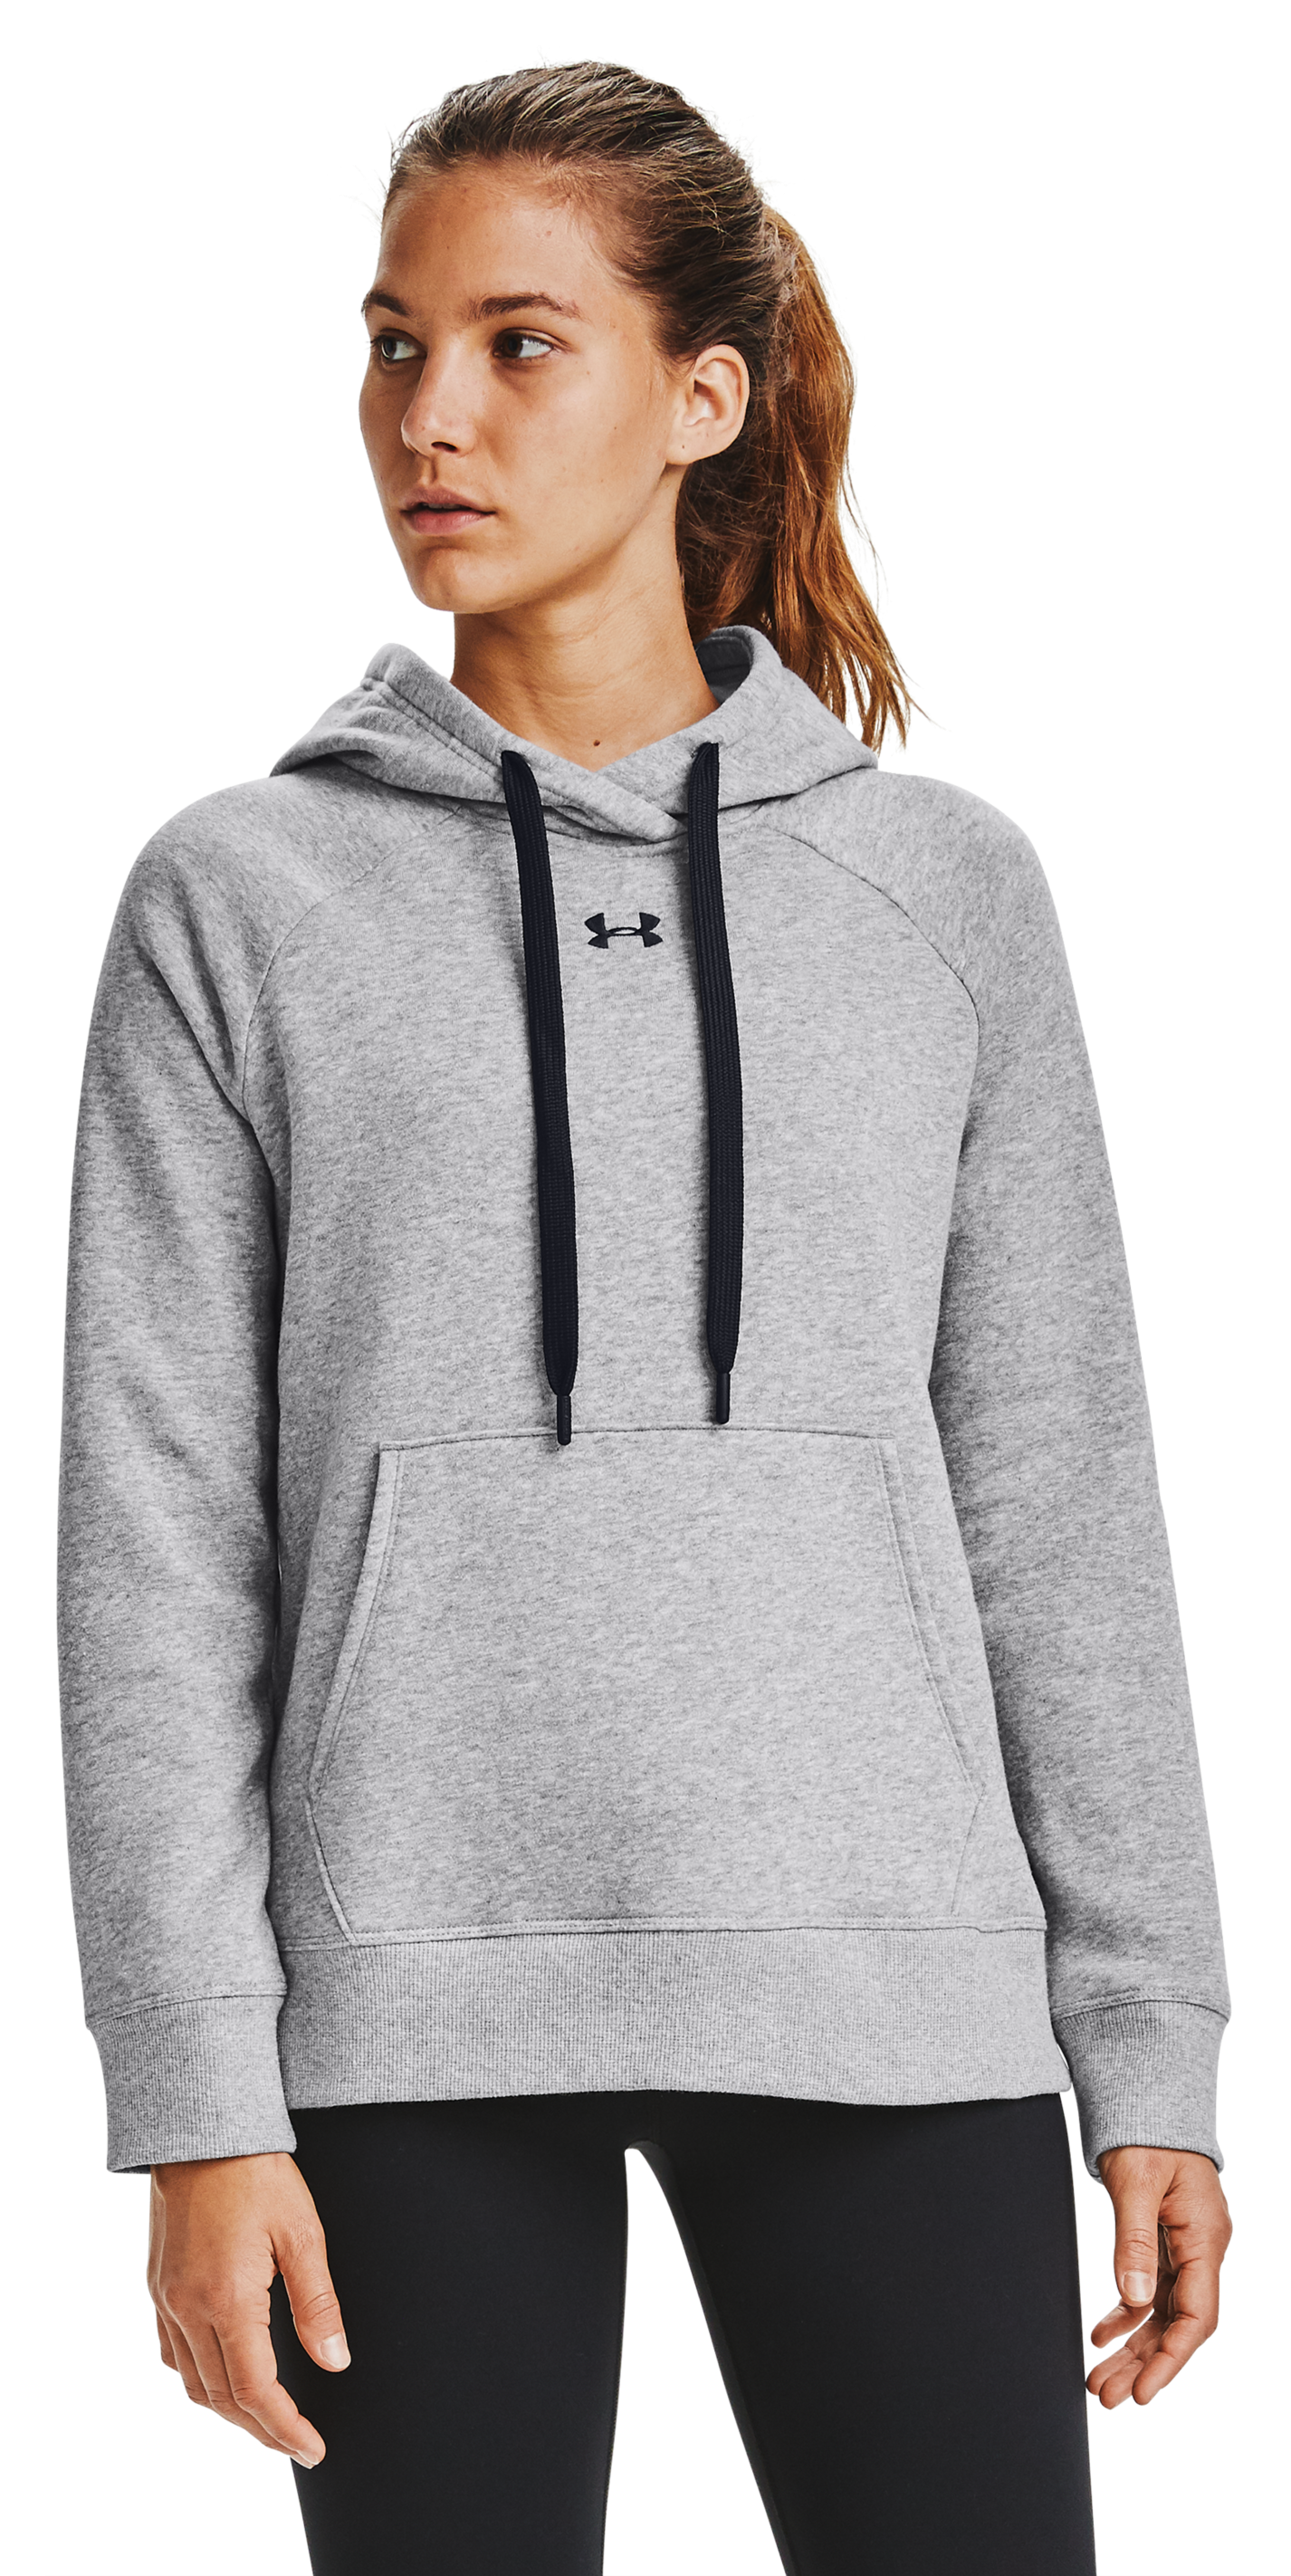 Under Armour, Tops, Under Armour Womens Hoodie Size Xl